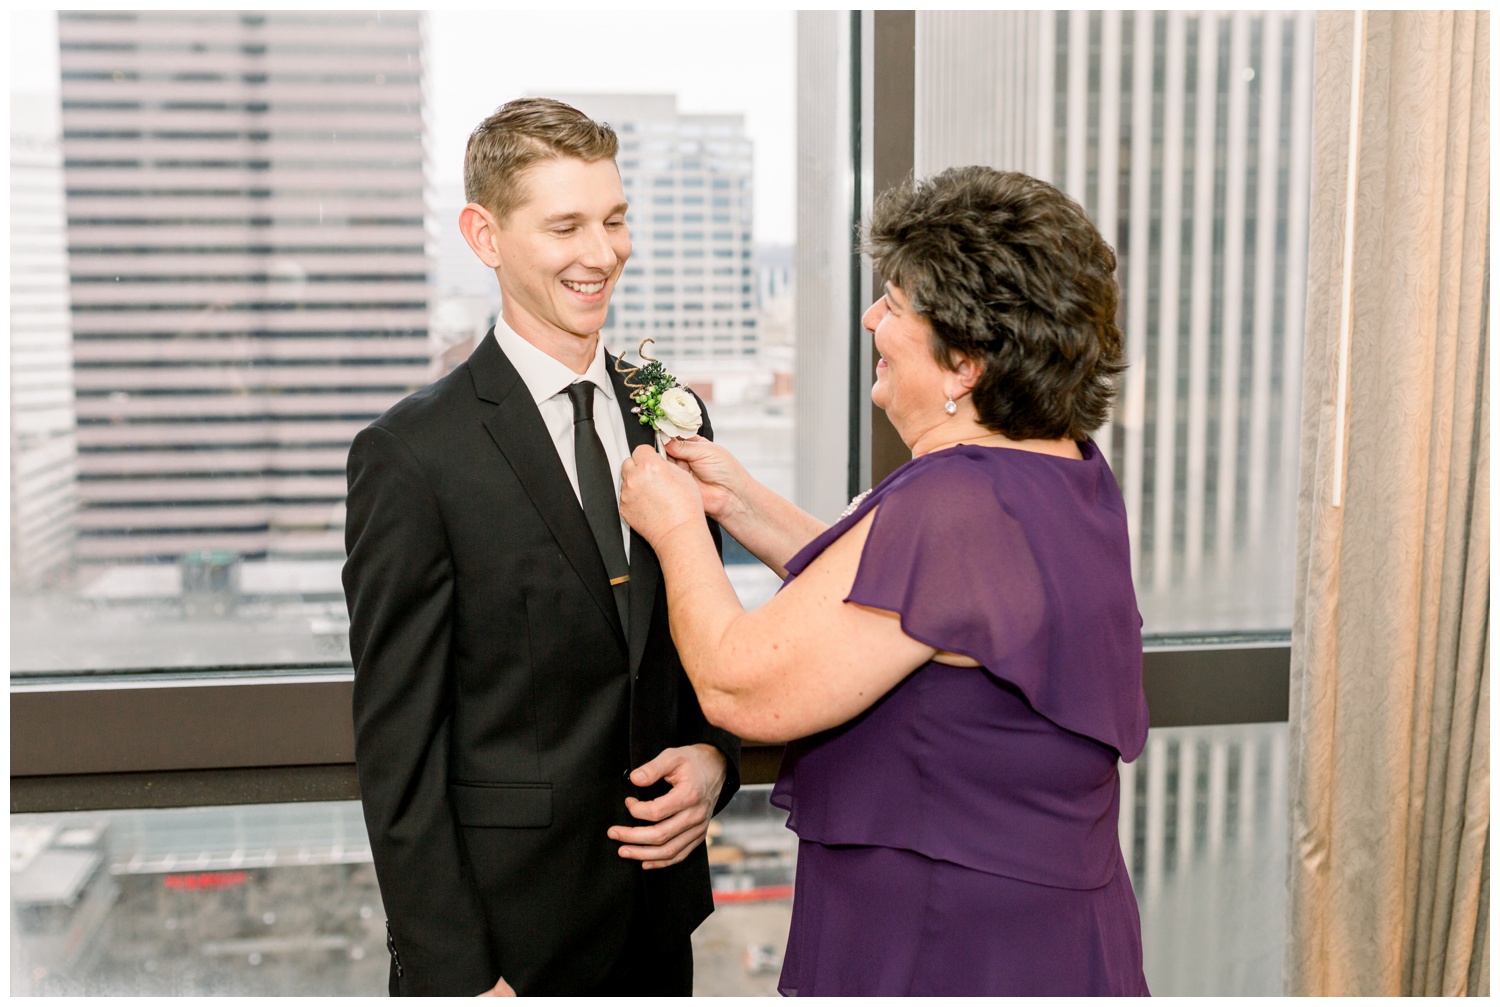 Groom with Mom - Putting on Boutonniere